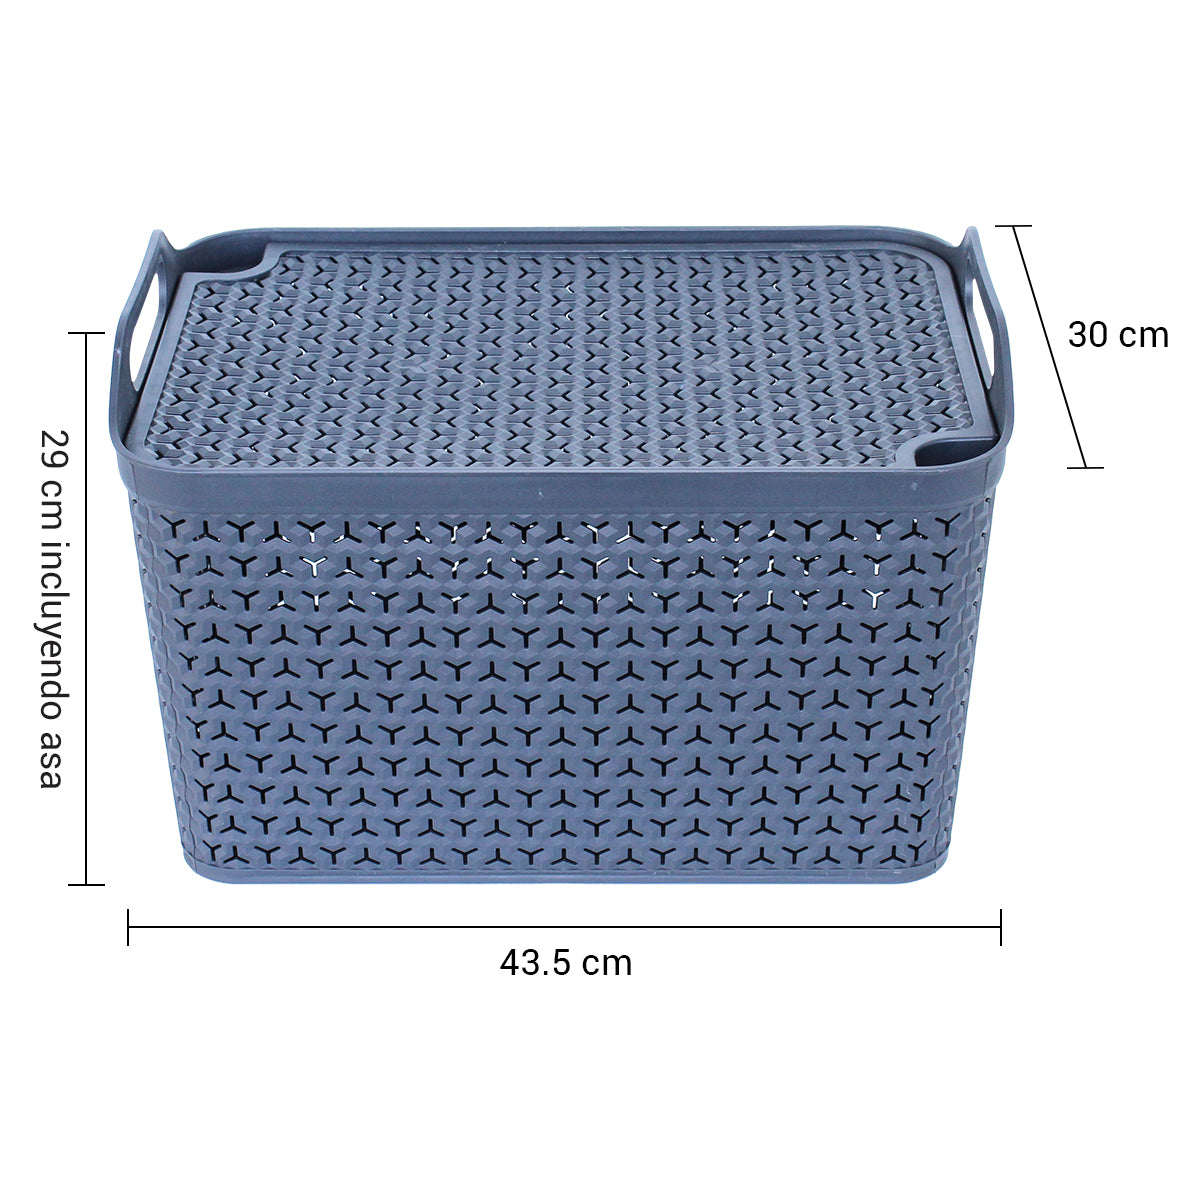 Stackable basket Large multi-purpose resistant basket made of recycled plastic Charcoal Gray Strata HW124